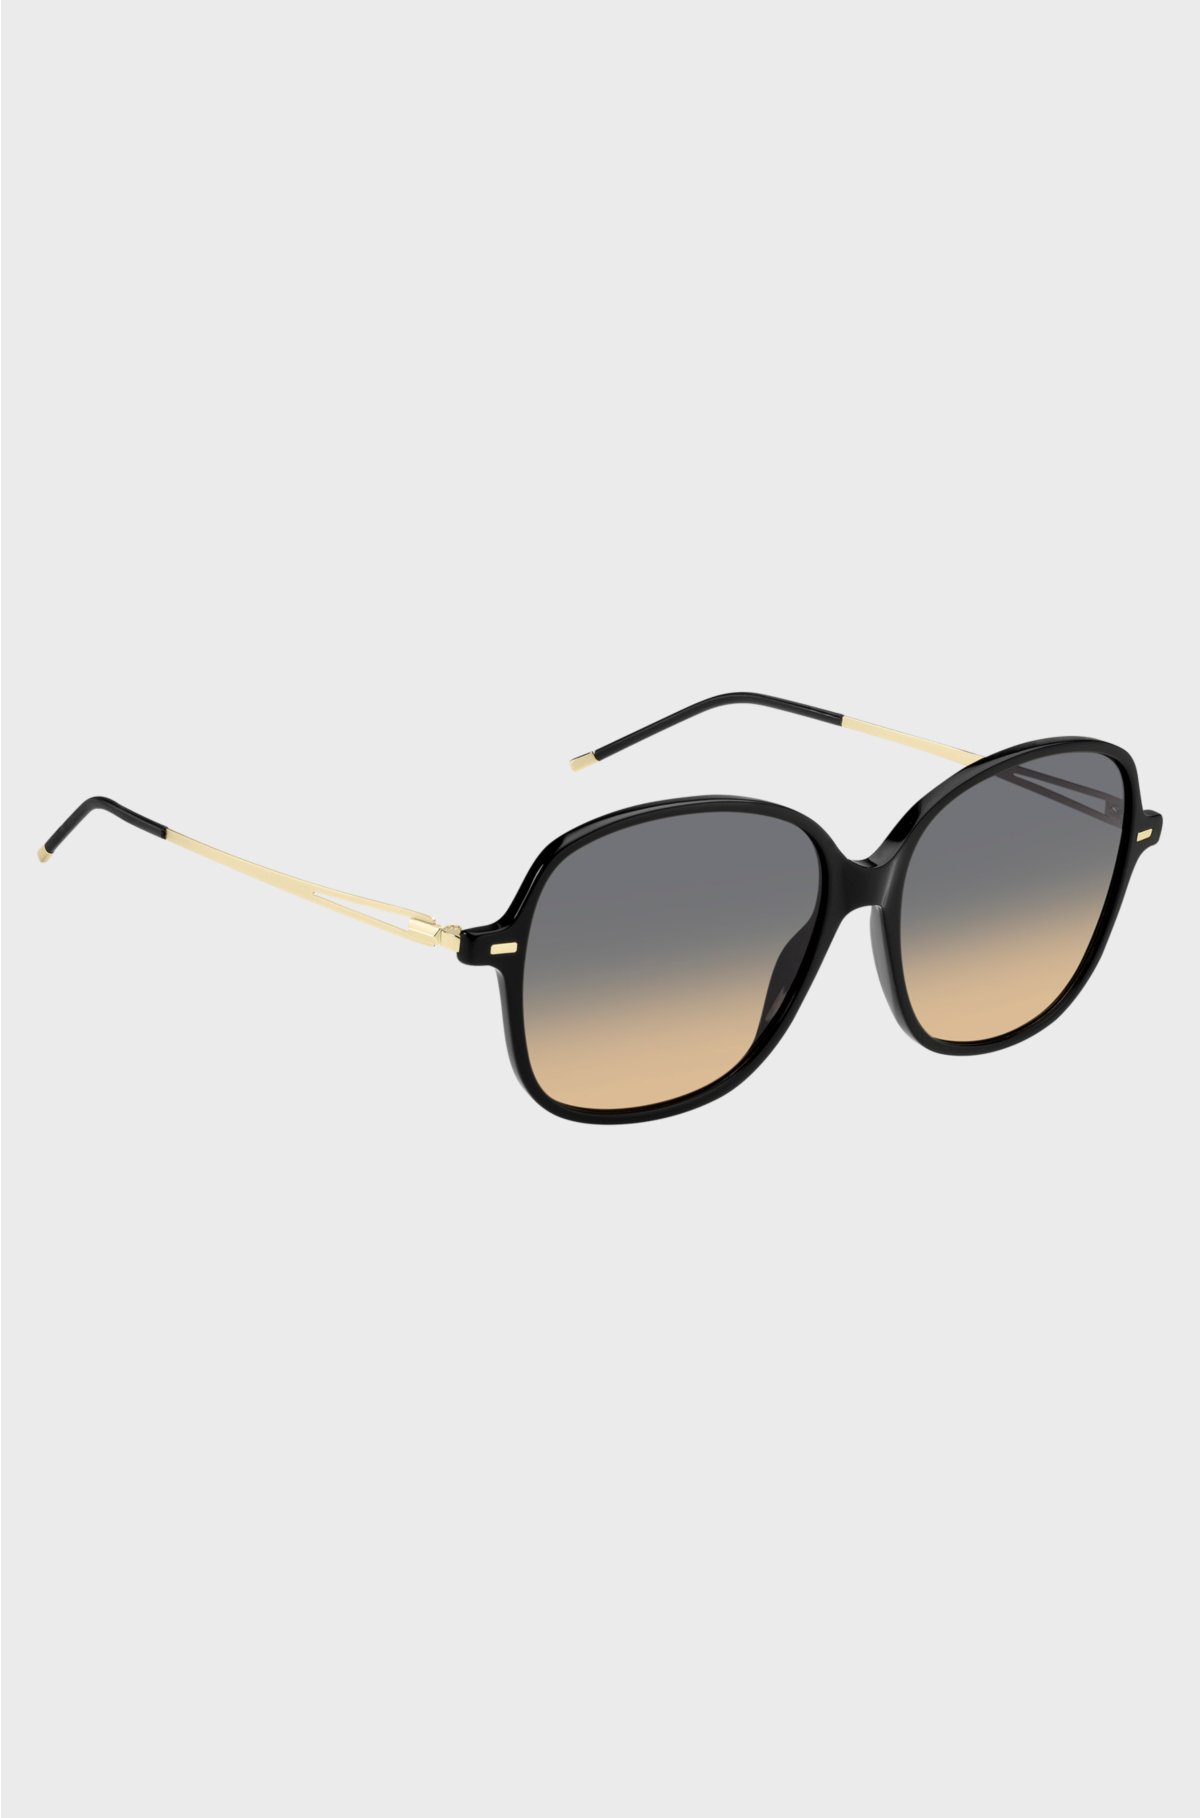 Black-acetate sunglasses with gold temples and chain strap, Black